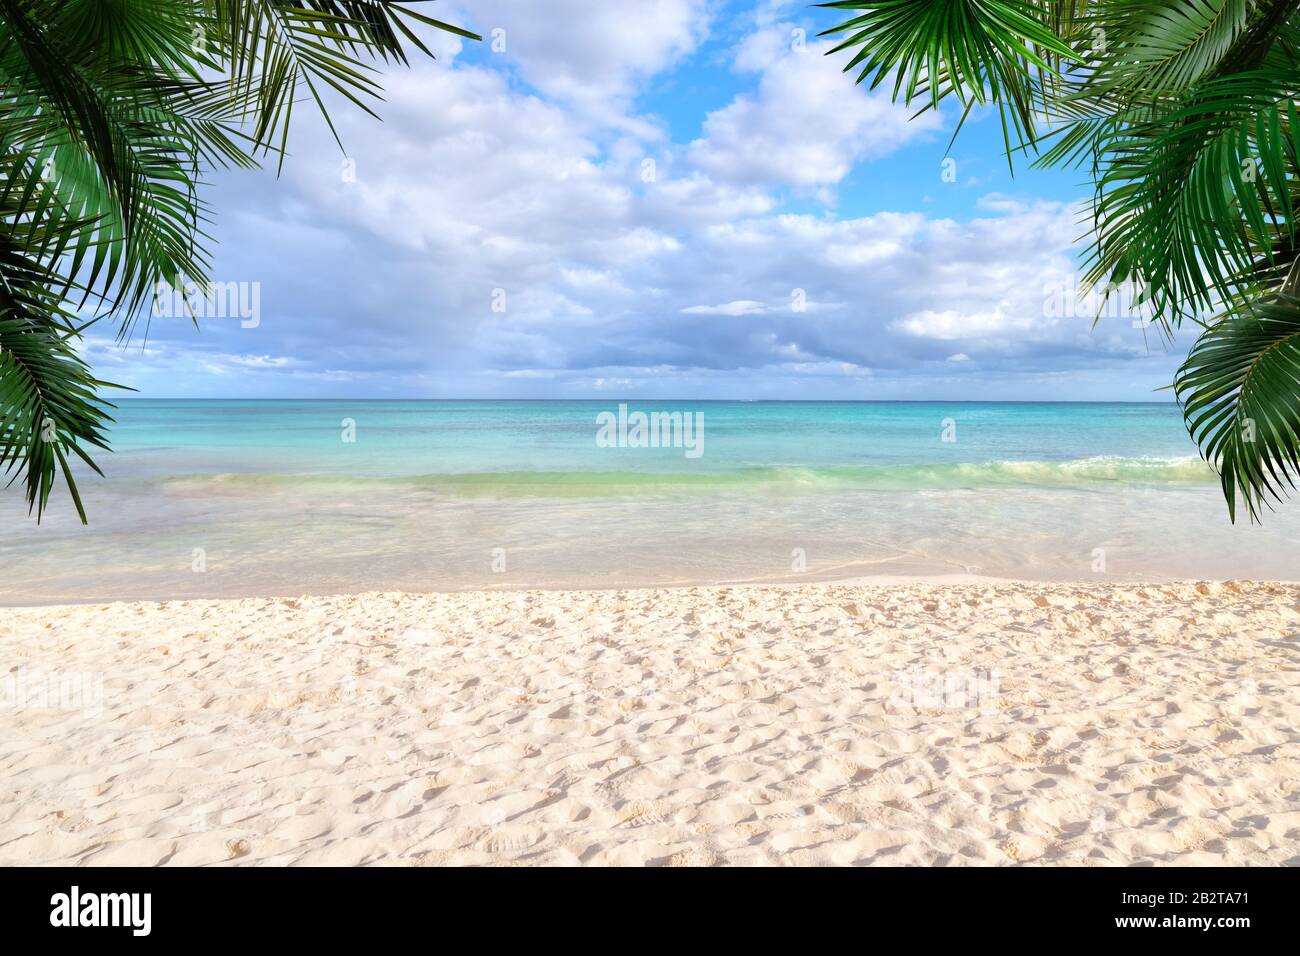 Sunny tropical beach background with sandy beach, clear sea waters and palm trees with copy space. Stock Photo